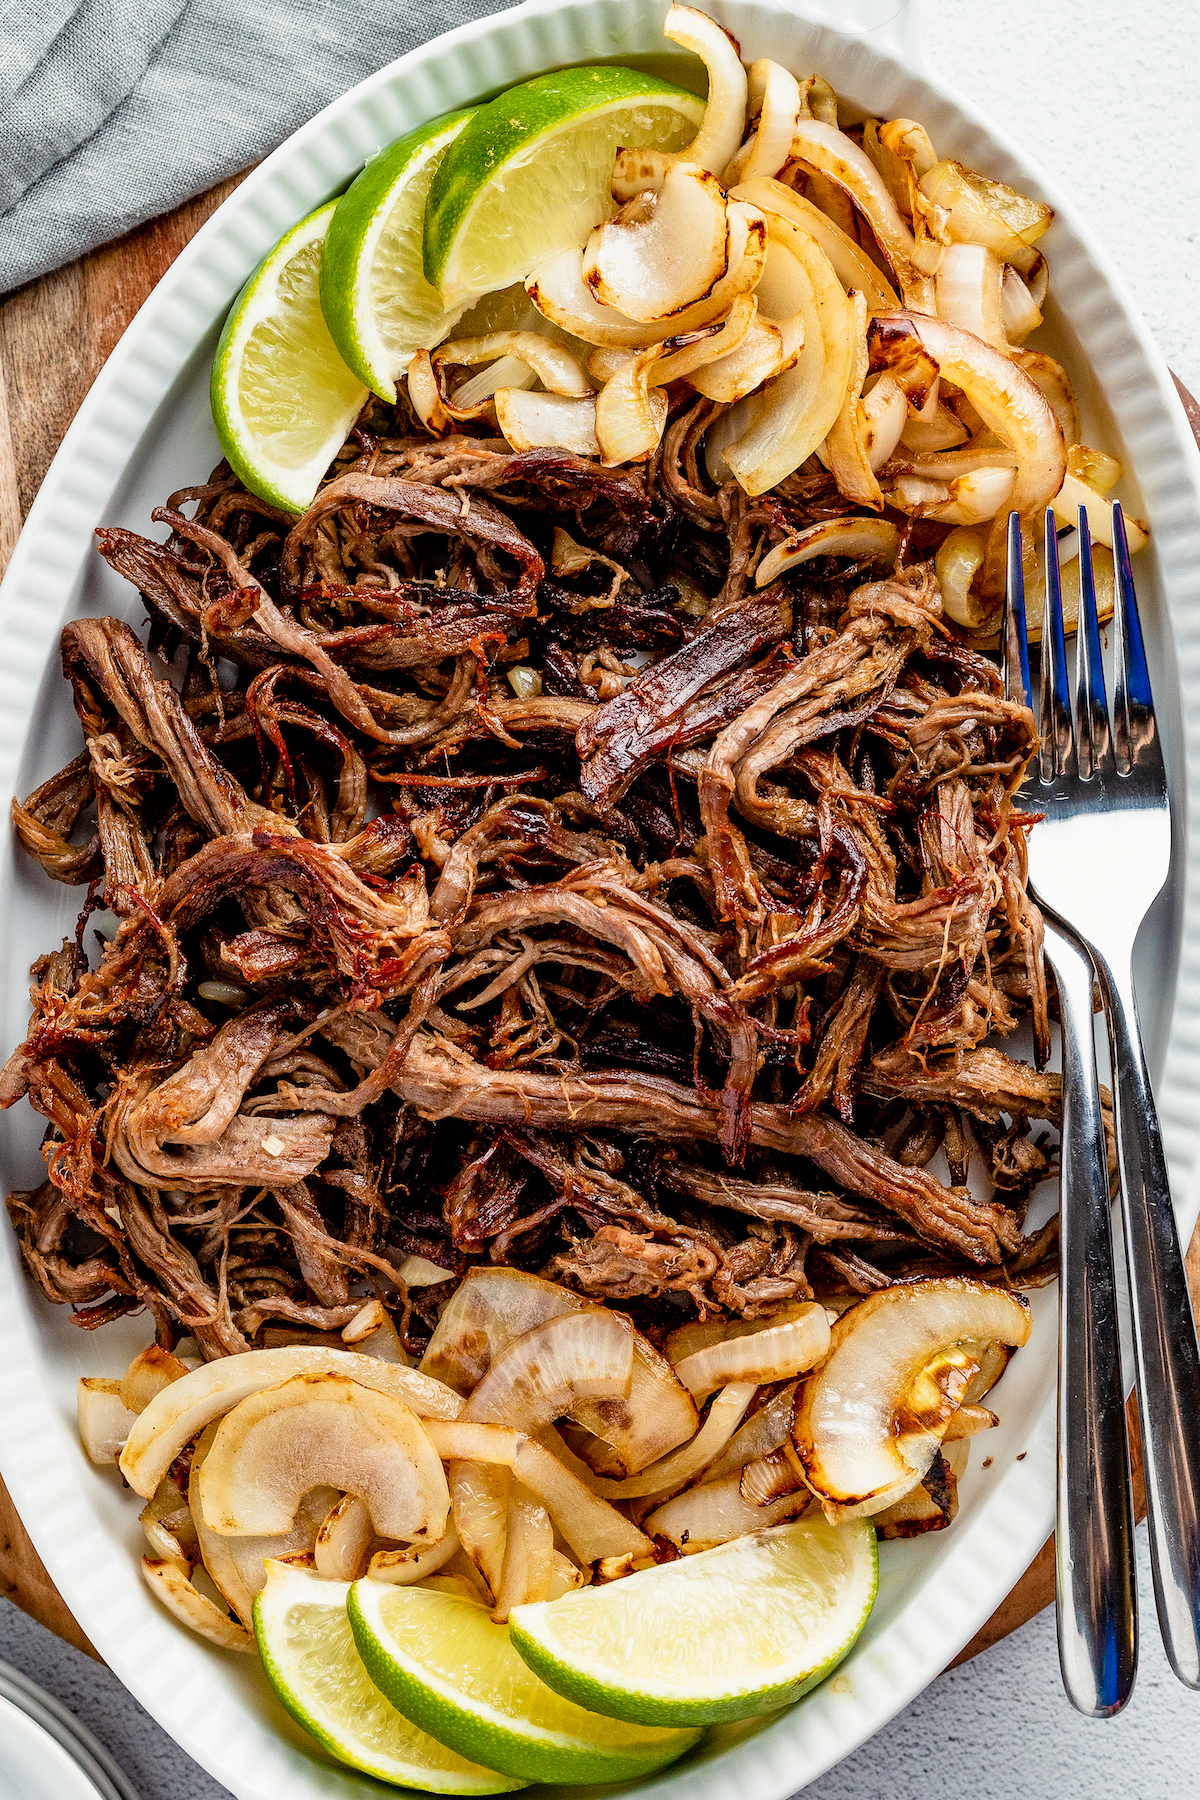 A serving plate with shredded crispy beef, sautéed onions, lime wedges and two forks.